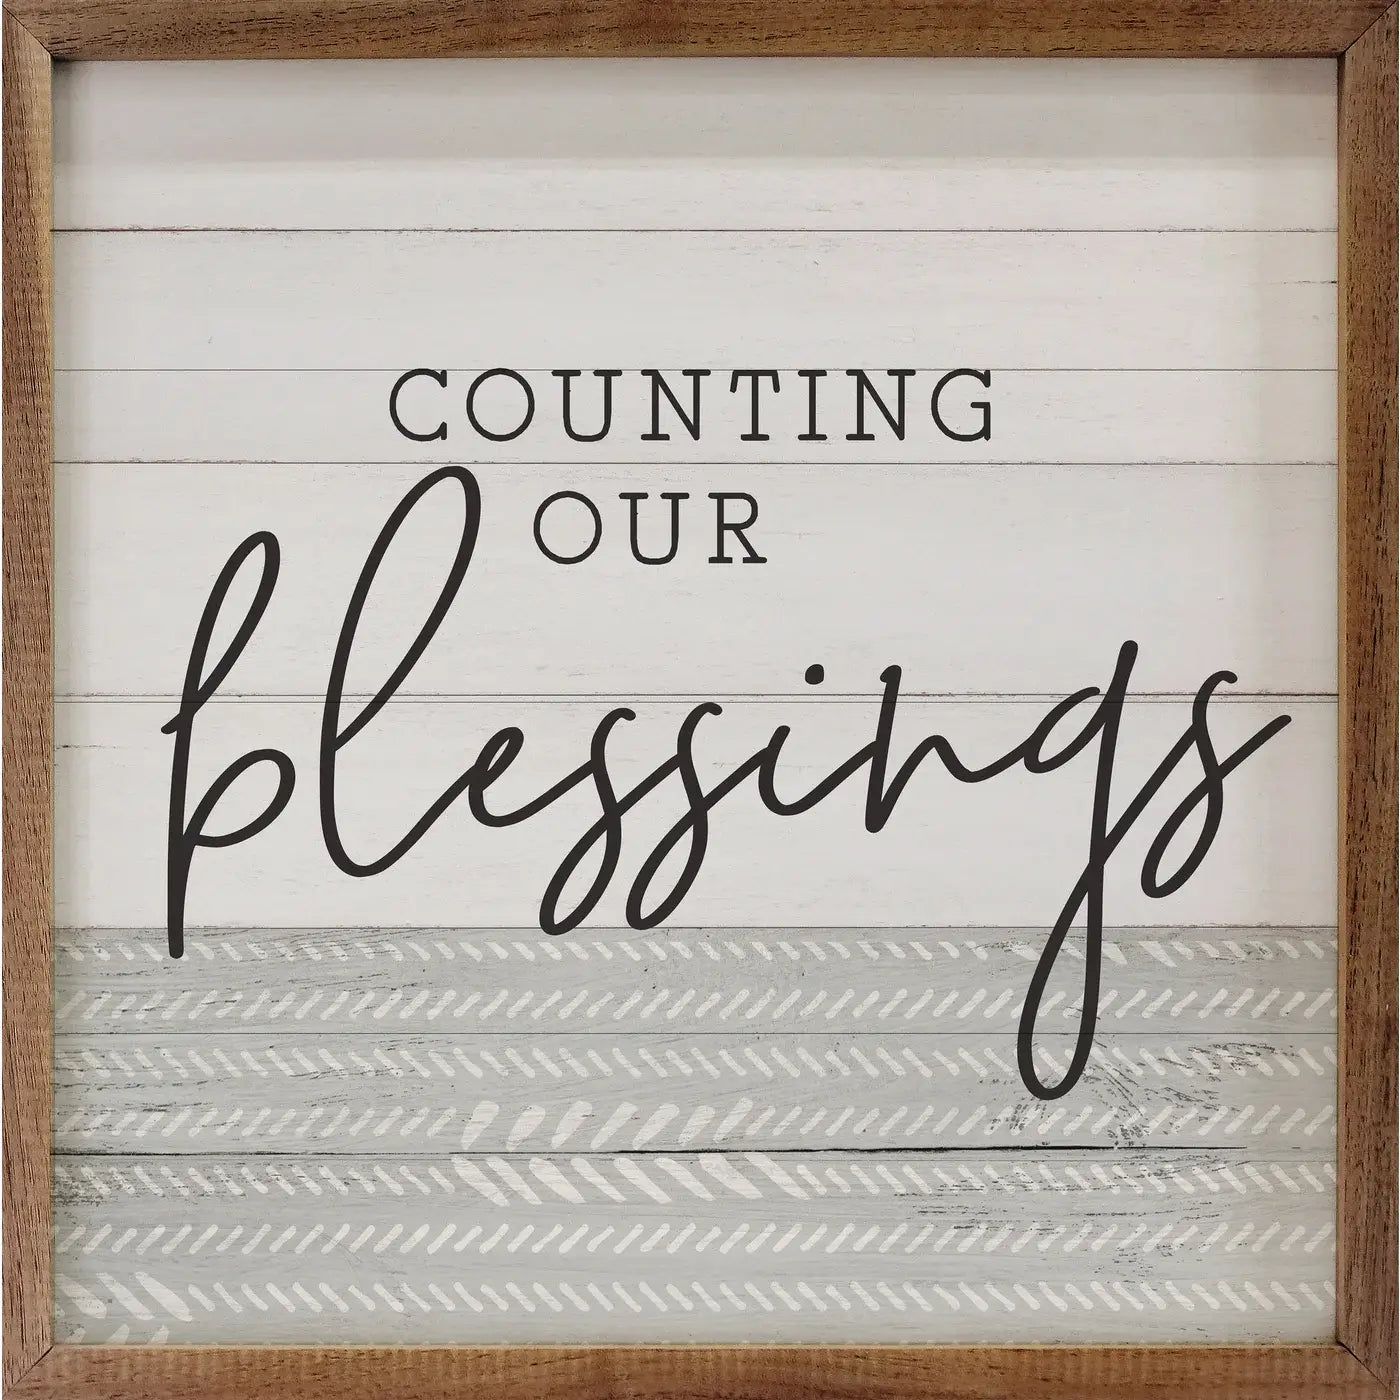 Count Your Blessings Framed Sign